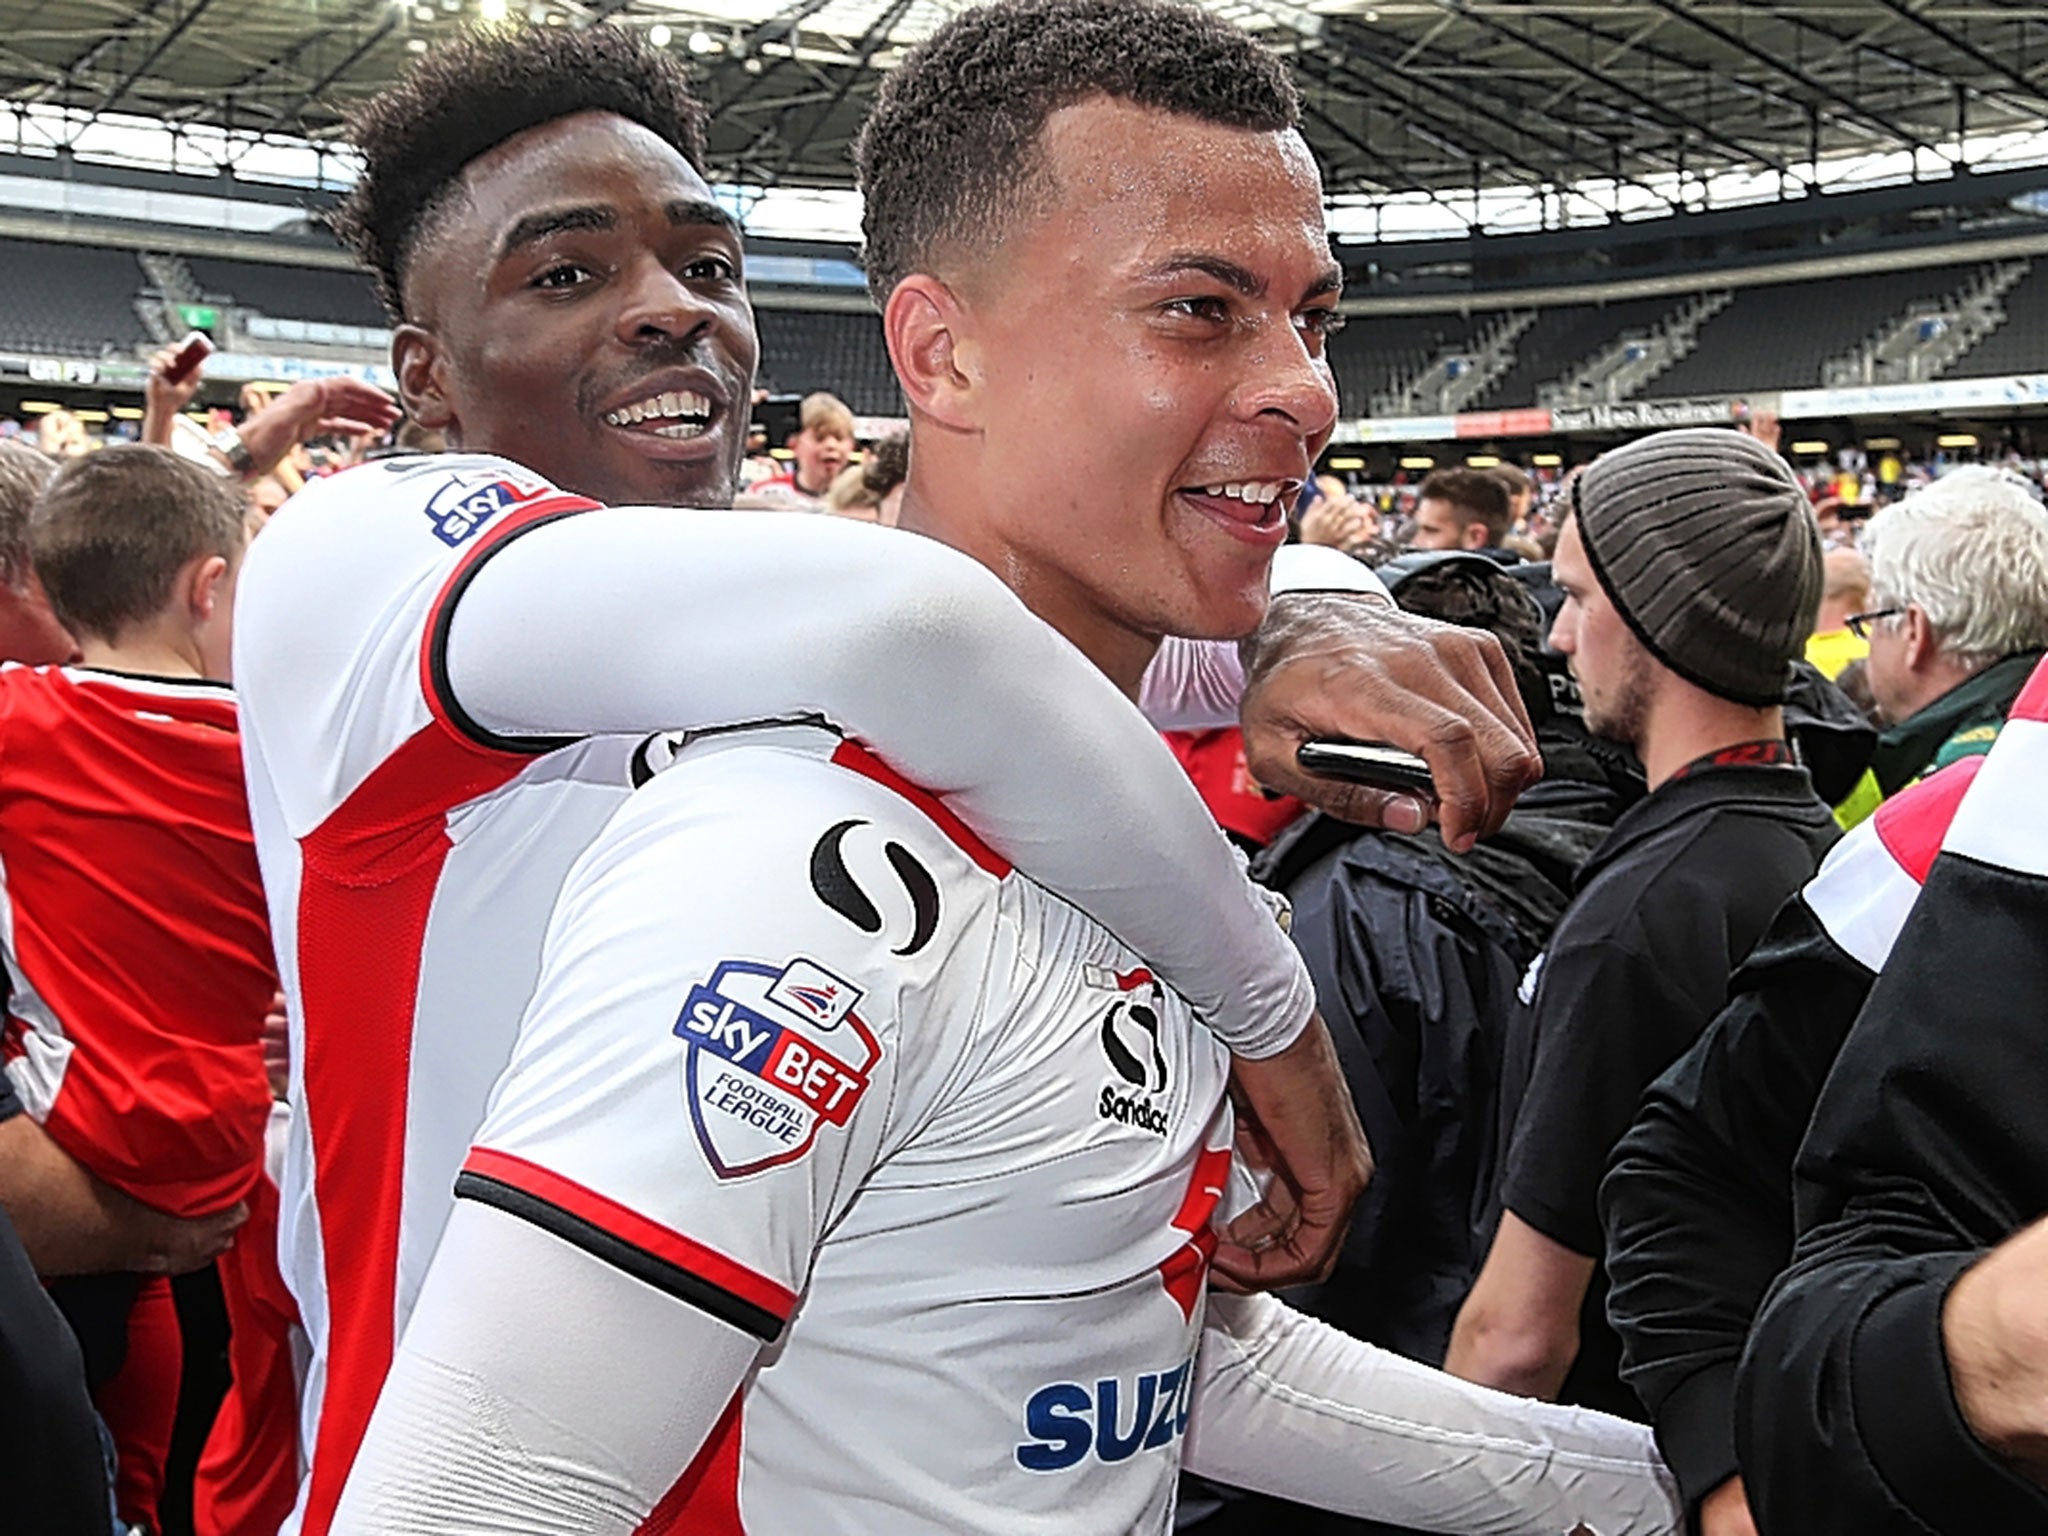 Dele Alli (right), who excelled at MK Dons last season, is an astute signing by Paul Mitchell at Tottenham